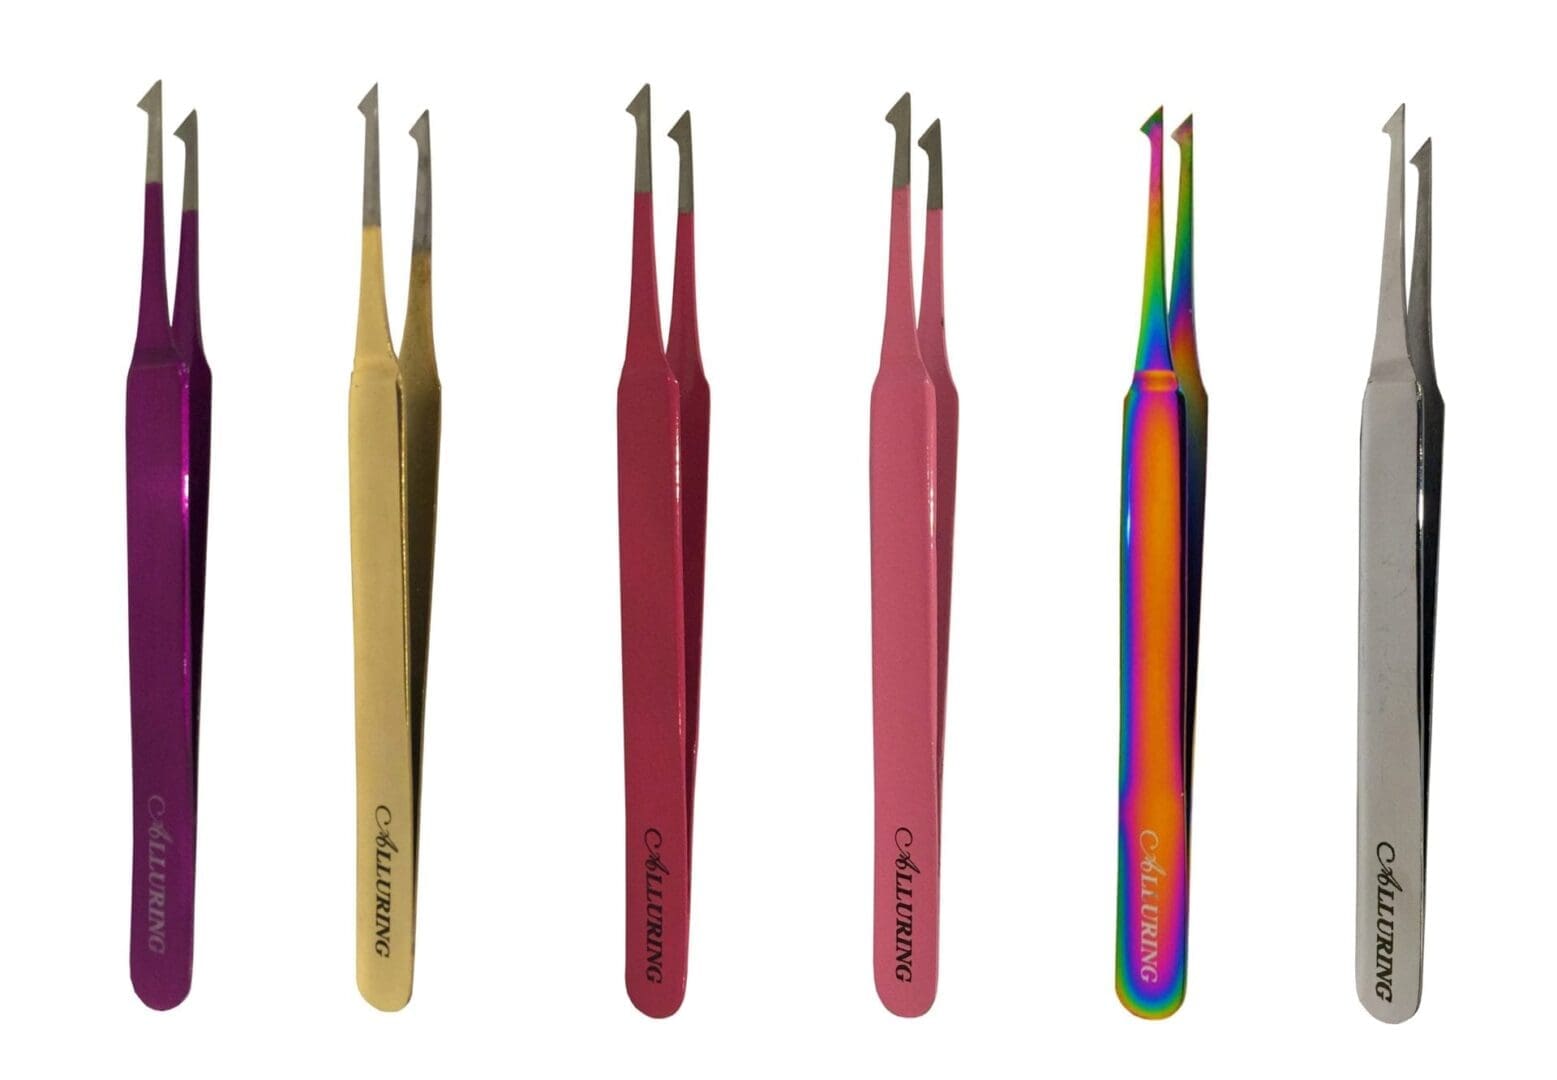 A set of four different colored tweezers.